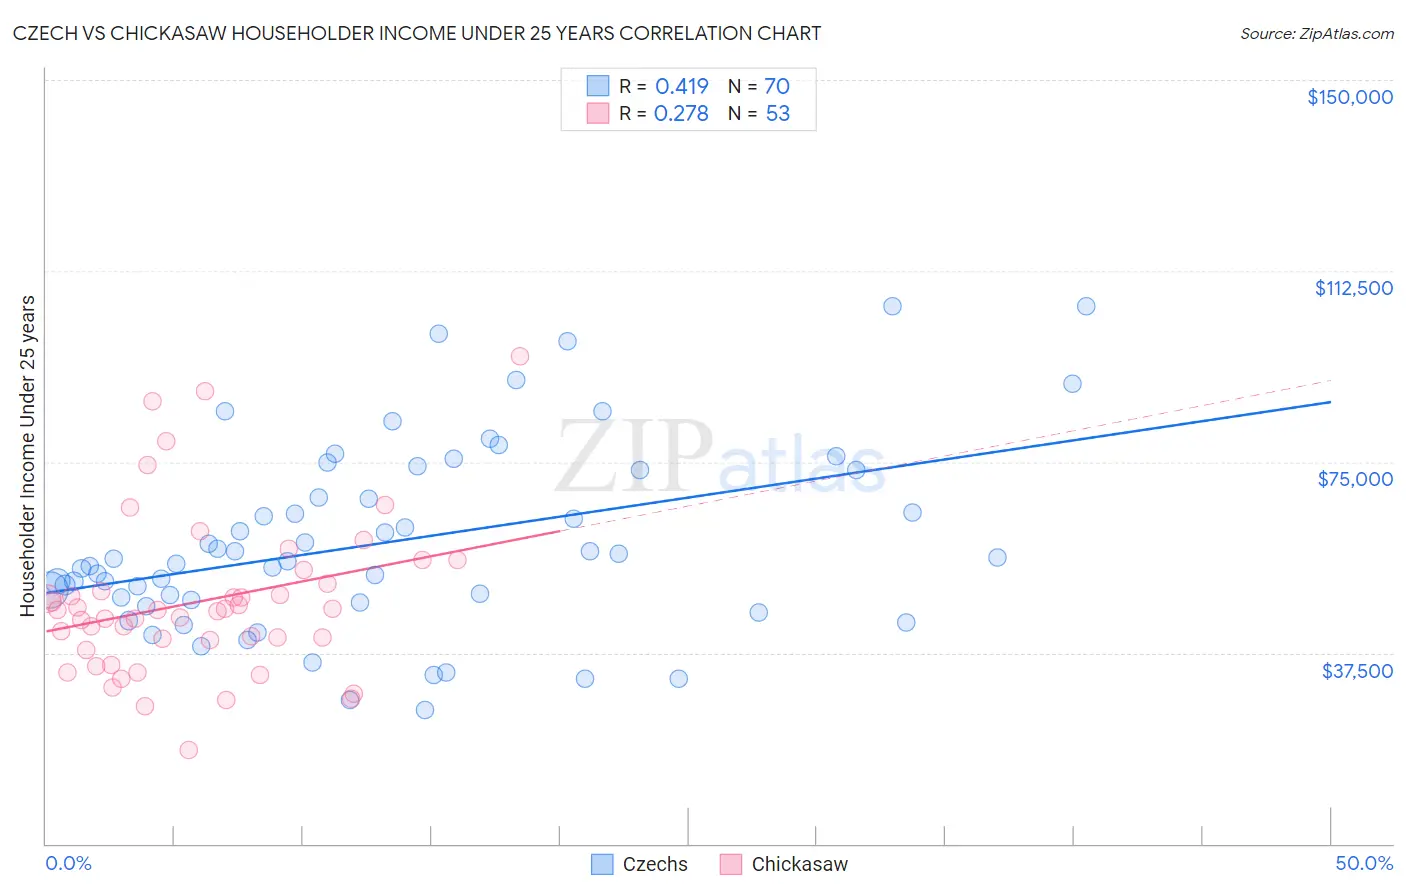 Czech vs Chickasaw Householder Income Under 25 years